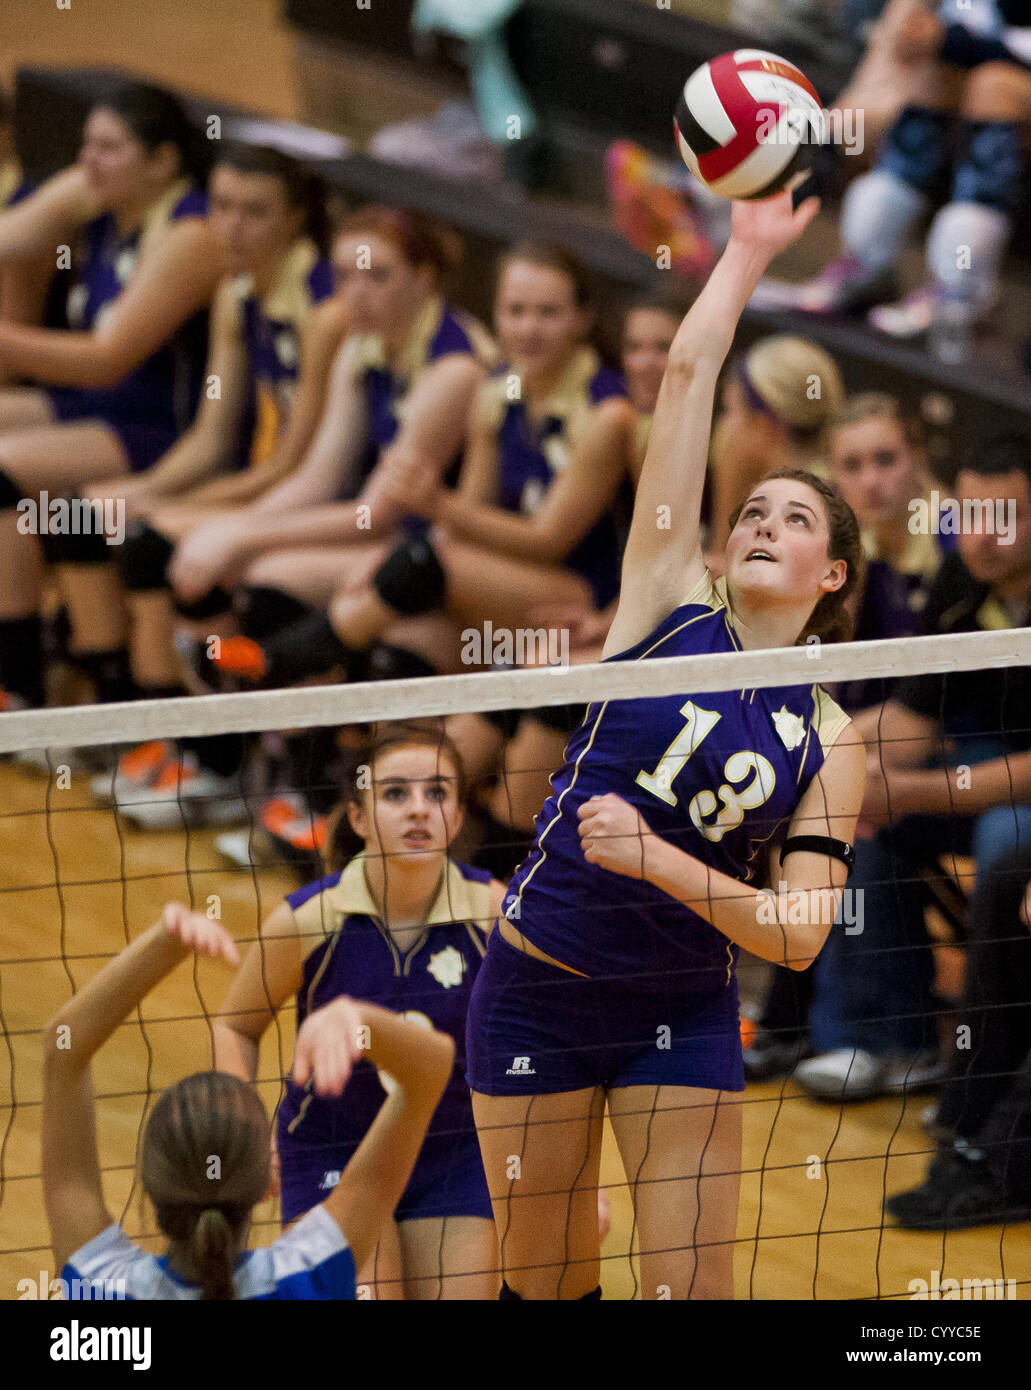 Nov. 12, 2012 - College Park, Maryland, U.S. - Smithsburg's Amanda Snowden hits the ball during the Sparrows Point High School versus Smithsburg High School match in the Semifinals of the Maryland State Volleyball 1A Championship at Ritchie Coliseum in College Park, Maryland on November 12, 2012. Smithsburg defeated Sparrows Point in straight sets 25-10, 25-12, 25-10 to advance to the State Finals. (Credit Image: © Scott Serio/Eclipse/ZUMAPRESS.com) Stock Photo